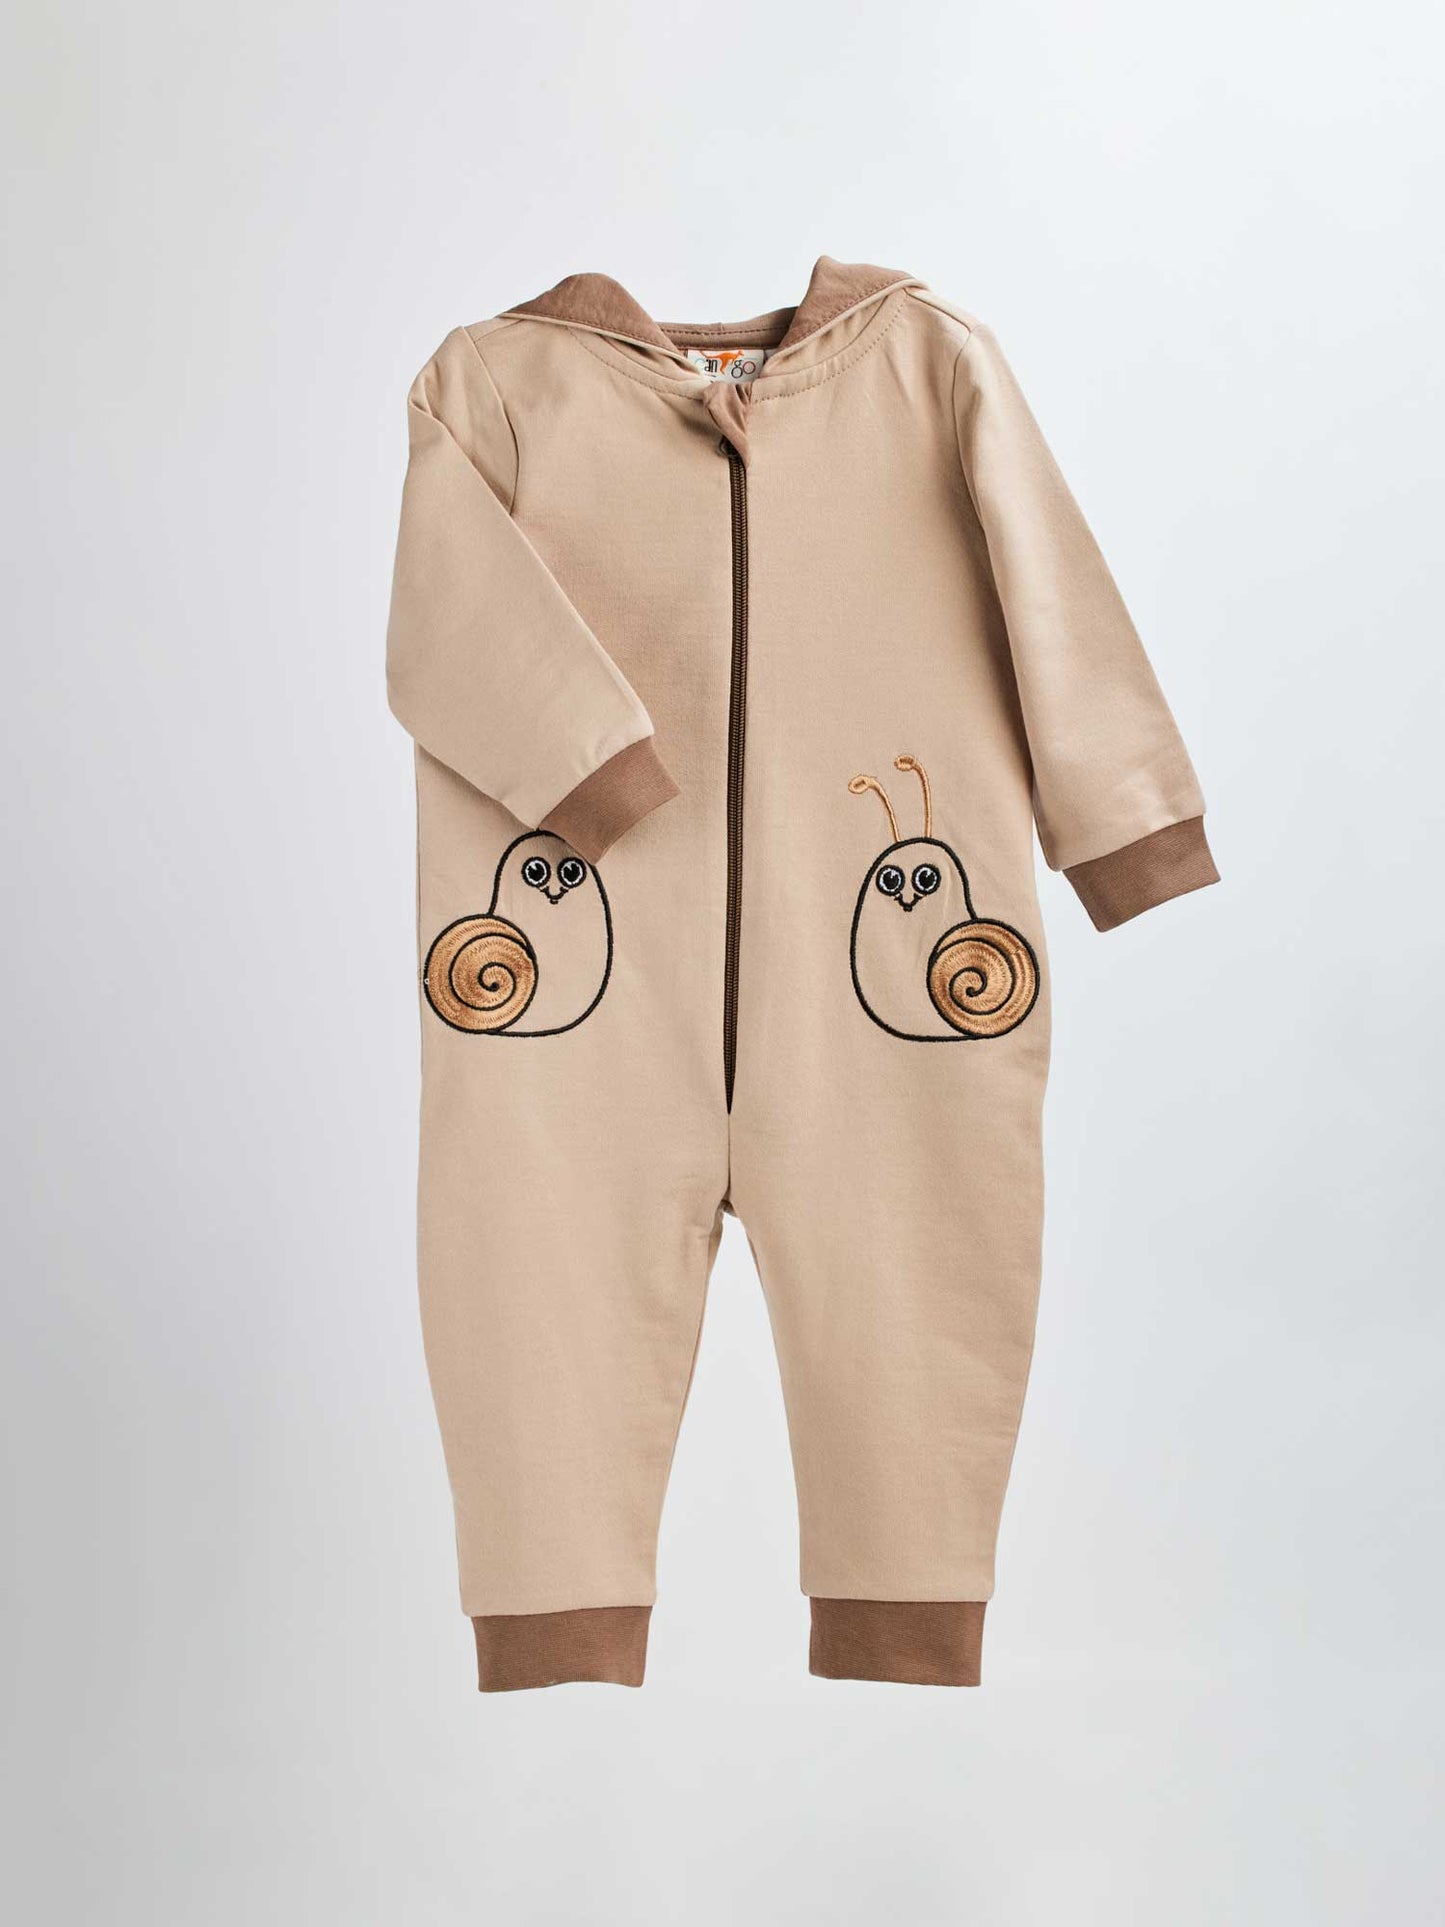 Infant overall snails 287 are one-piece hooded overalls made from high-quality soft cotton material and have embroidered sweet snails on them.